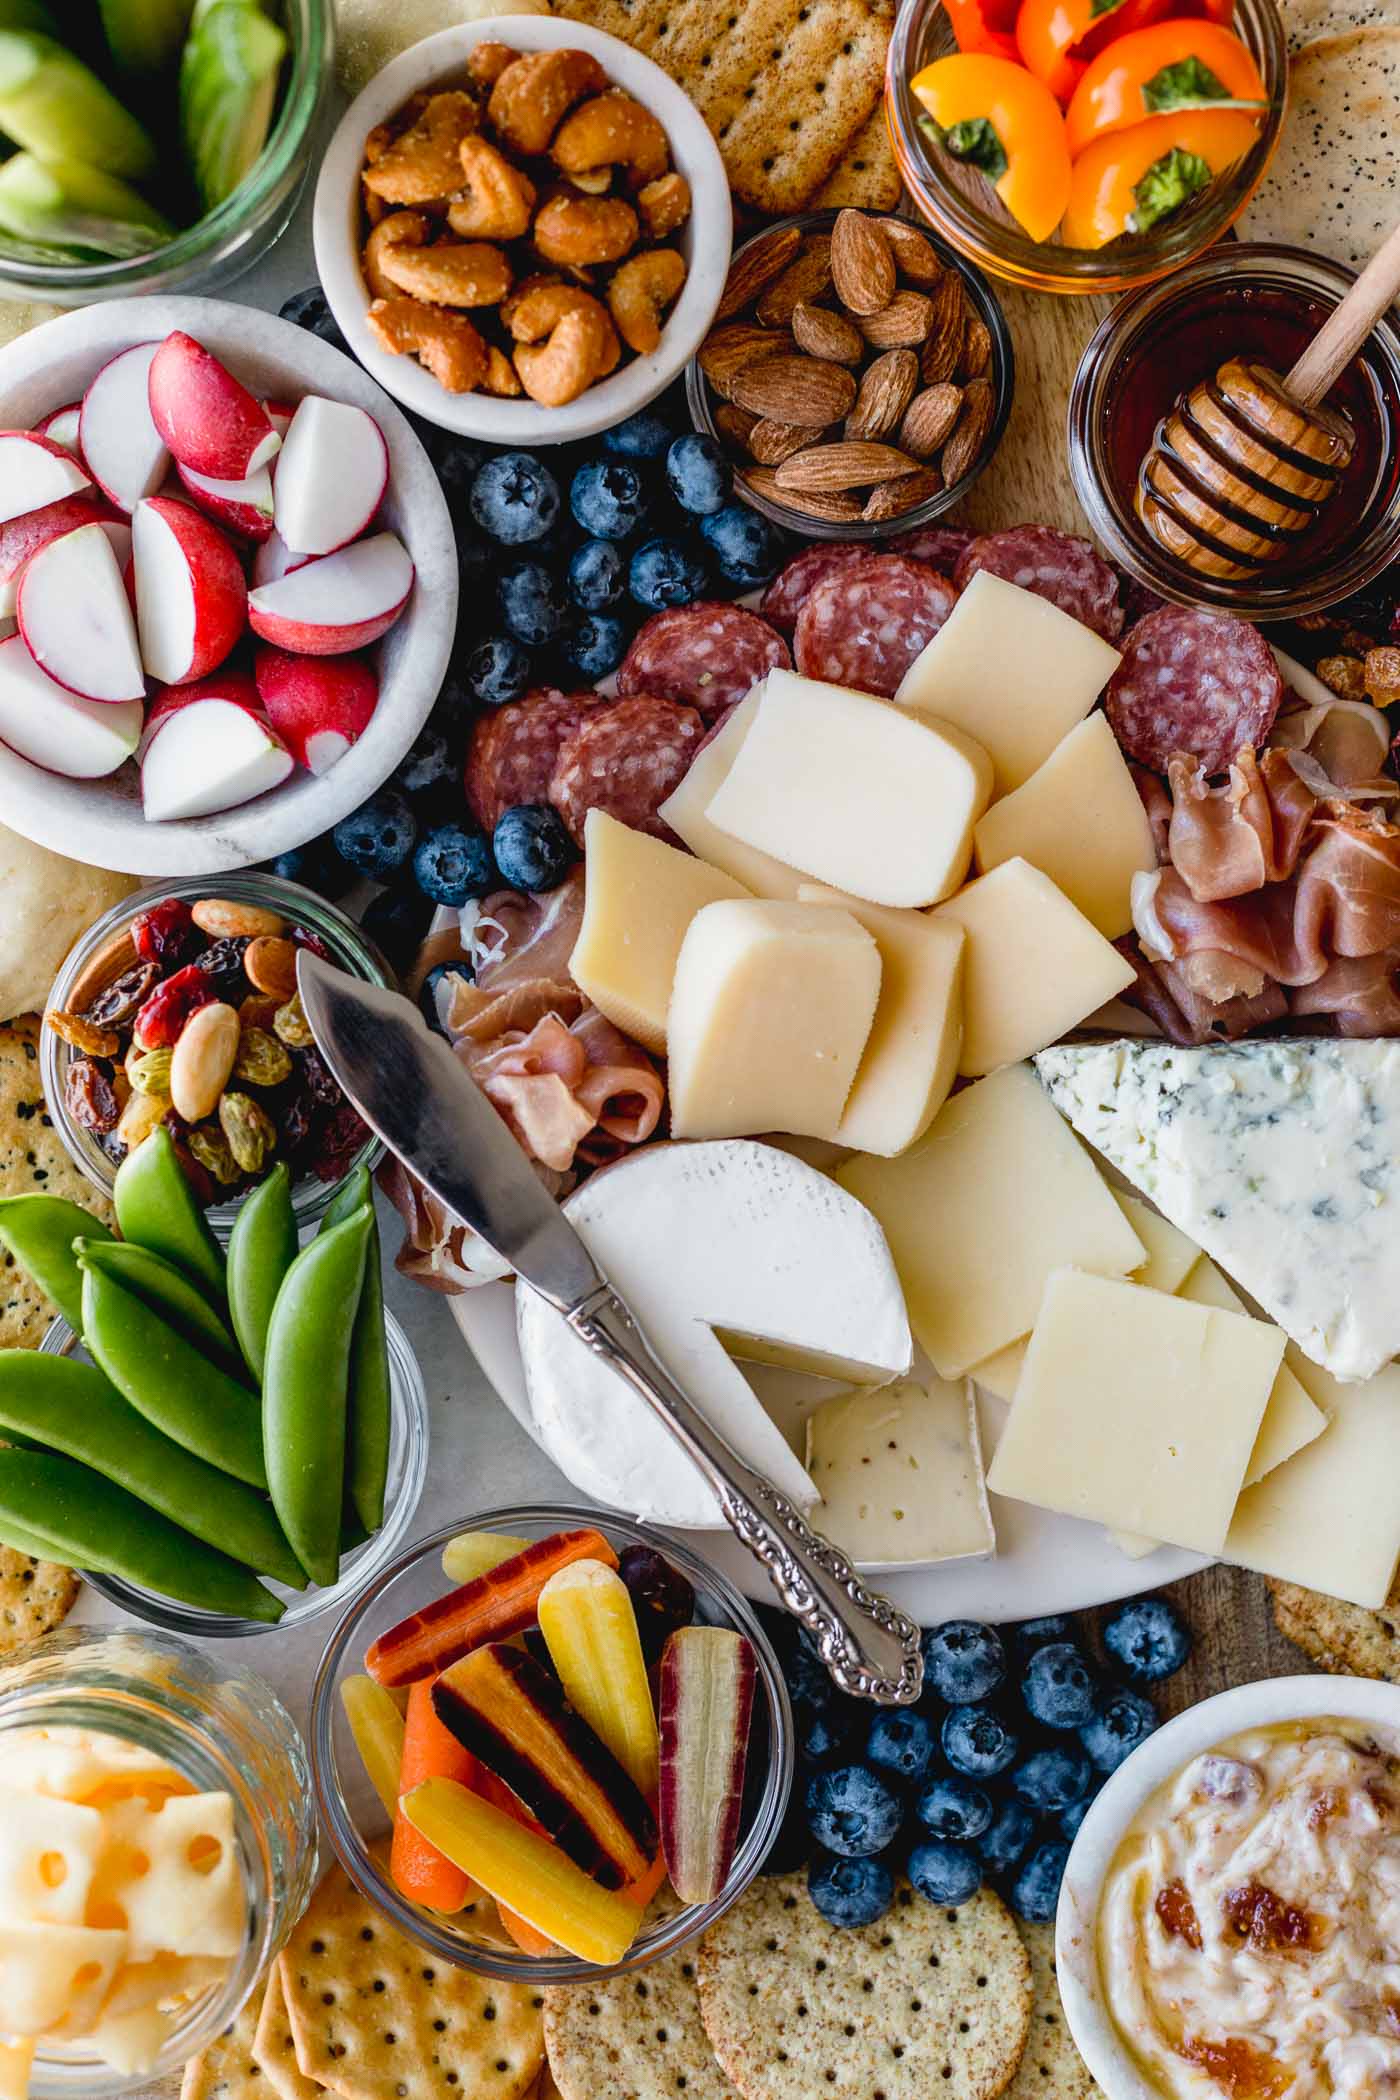 building a stunning & delicious ultimate cheese board on a budget couldn’t be easier when you take advantage of the low prices at aldi! this ultimate aldi cheese board is inspired by springtime with a variety of cheeses, crackers, veggies, & nuts, & is perfect for any spring celebration - mother’s day, father’s day, graduation parties, bridal showers, or spring brunches! #playswellwithbutter #cheeseboard #howtomakeacheeseboard #easycheeseboard #cheeseboardideas #springcheeseboard #bridalshoweridea #appetizeridea #appetizerrecipe #aldirecipe #whattobuyataldi #aldifinds